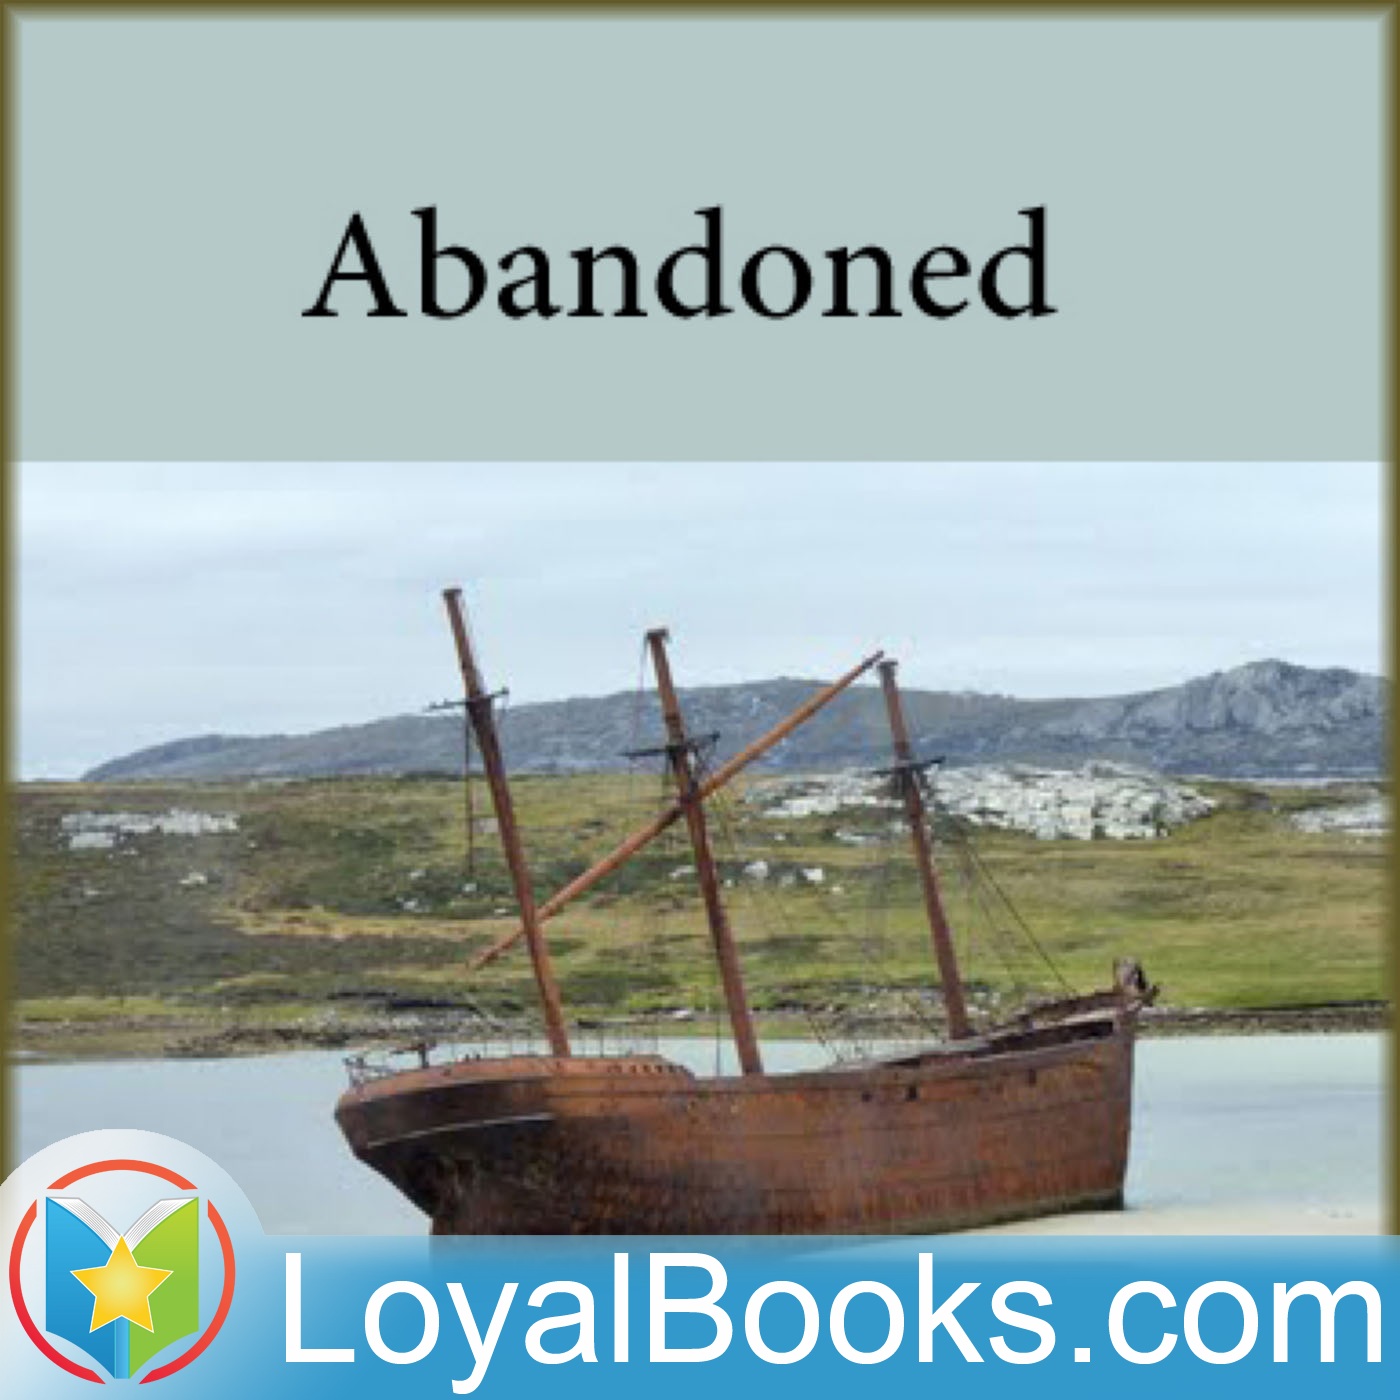 Abandoned by William Clark Russell